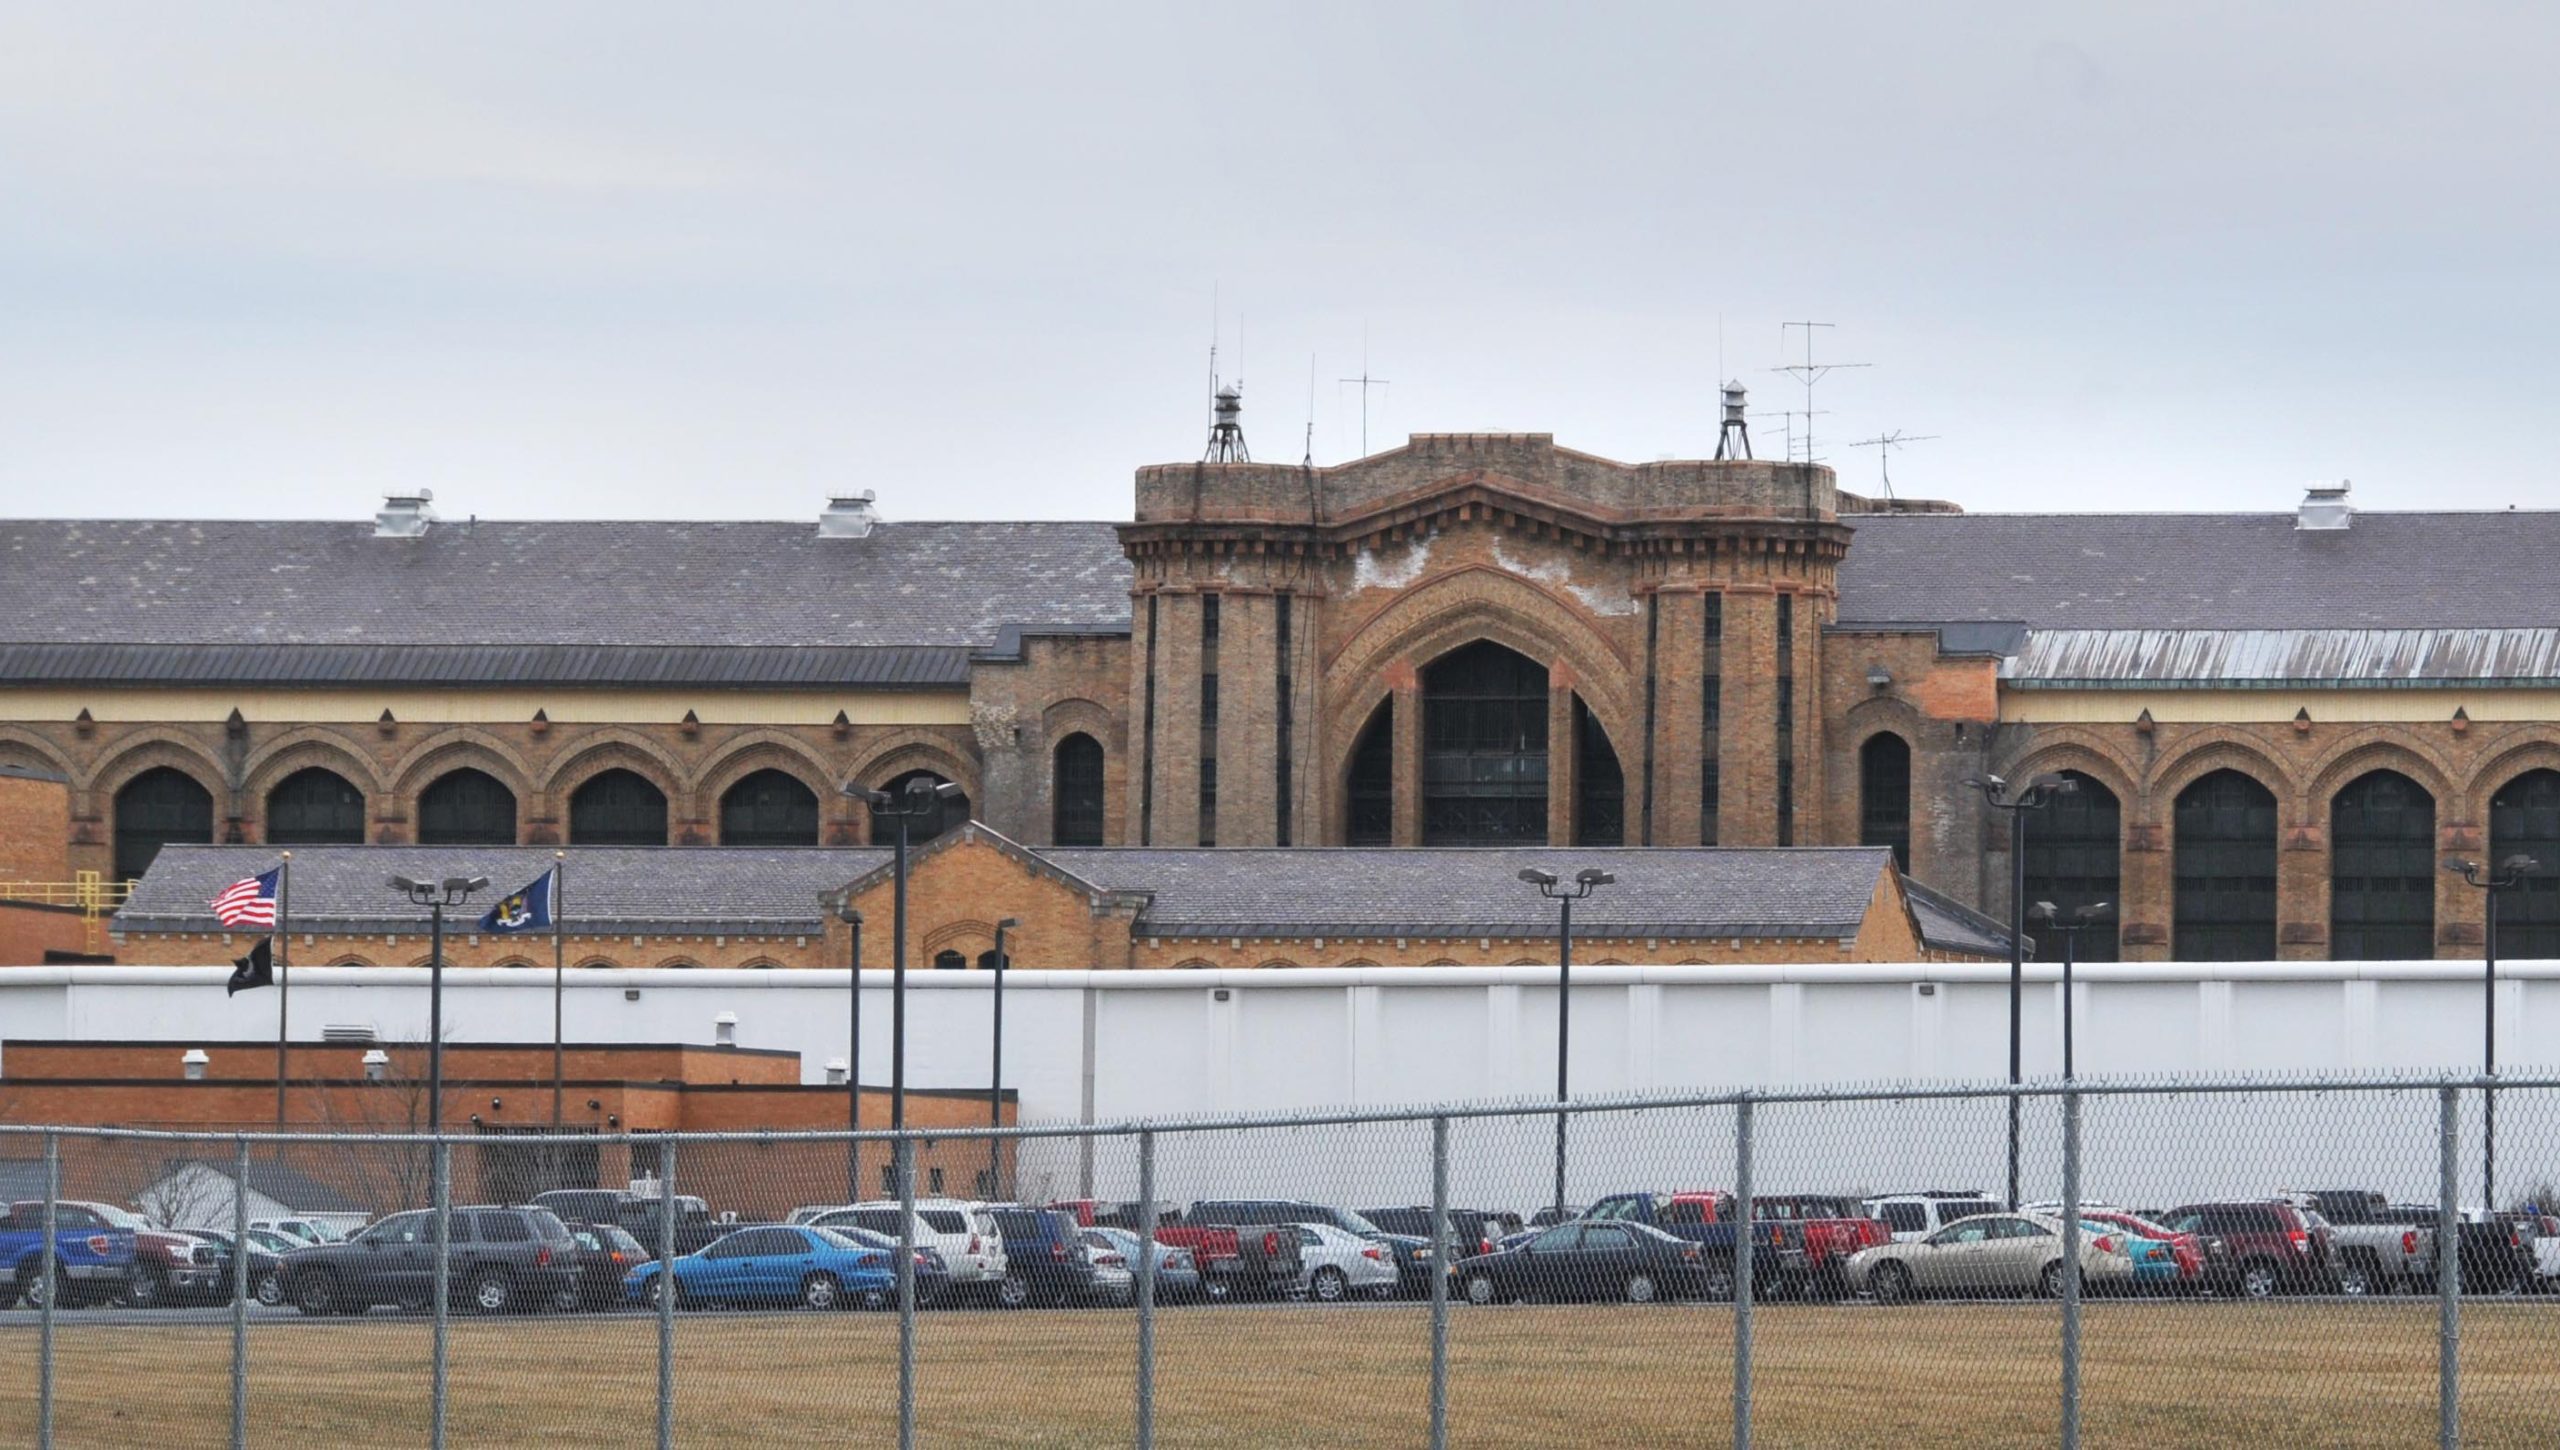 A view of the exterior of Great Meadow Correctional Facility during the day. Cars are parked in front of the orange-brown colored building, which has arched windows. 